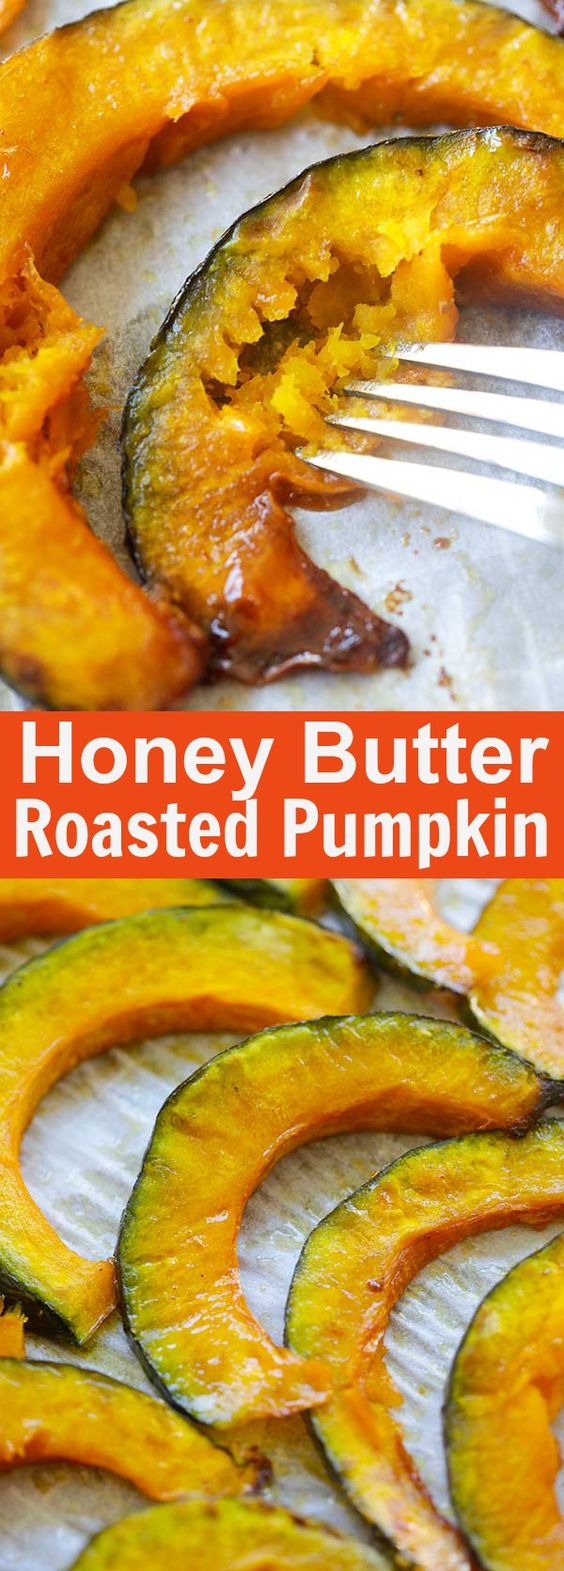 Honey Butter Roasted Pumpkin - best honey roasted pumpkin recipe, with butter and cayenne pepper. 3 ingredients only, perfect for Fall | rasamalaysia.com